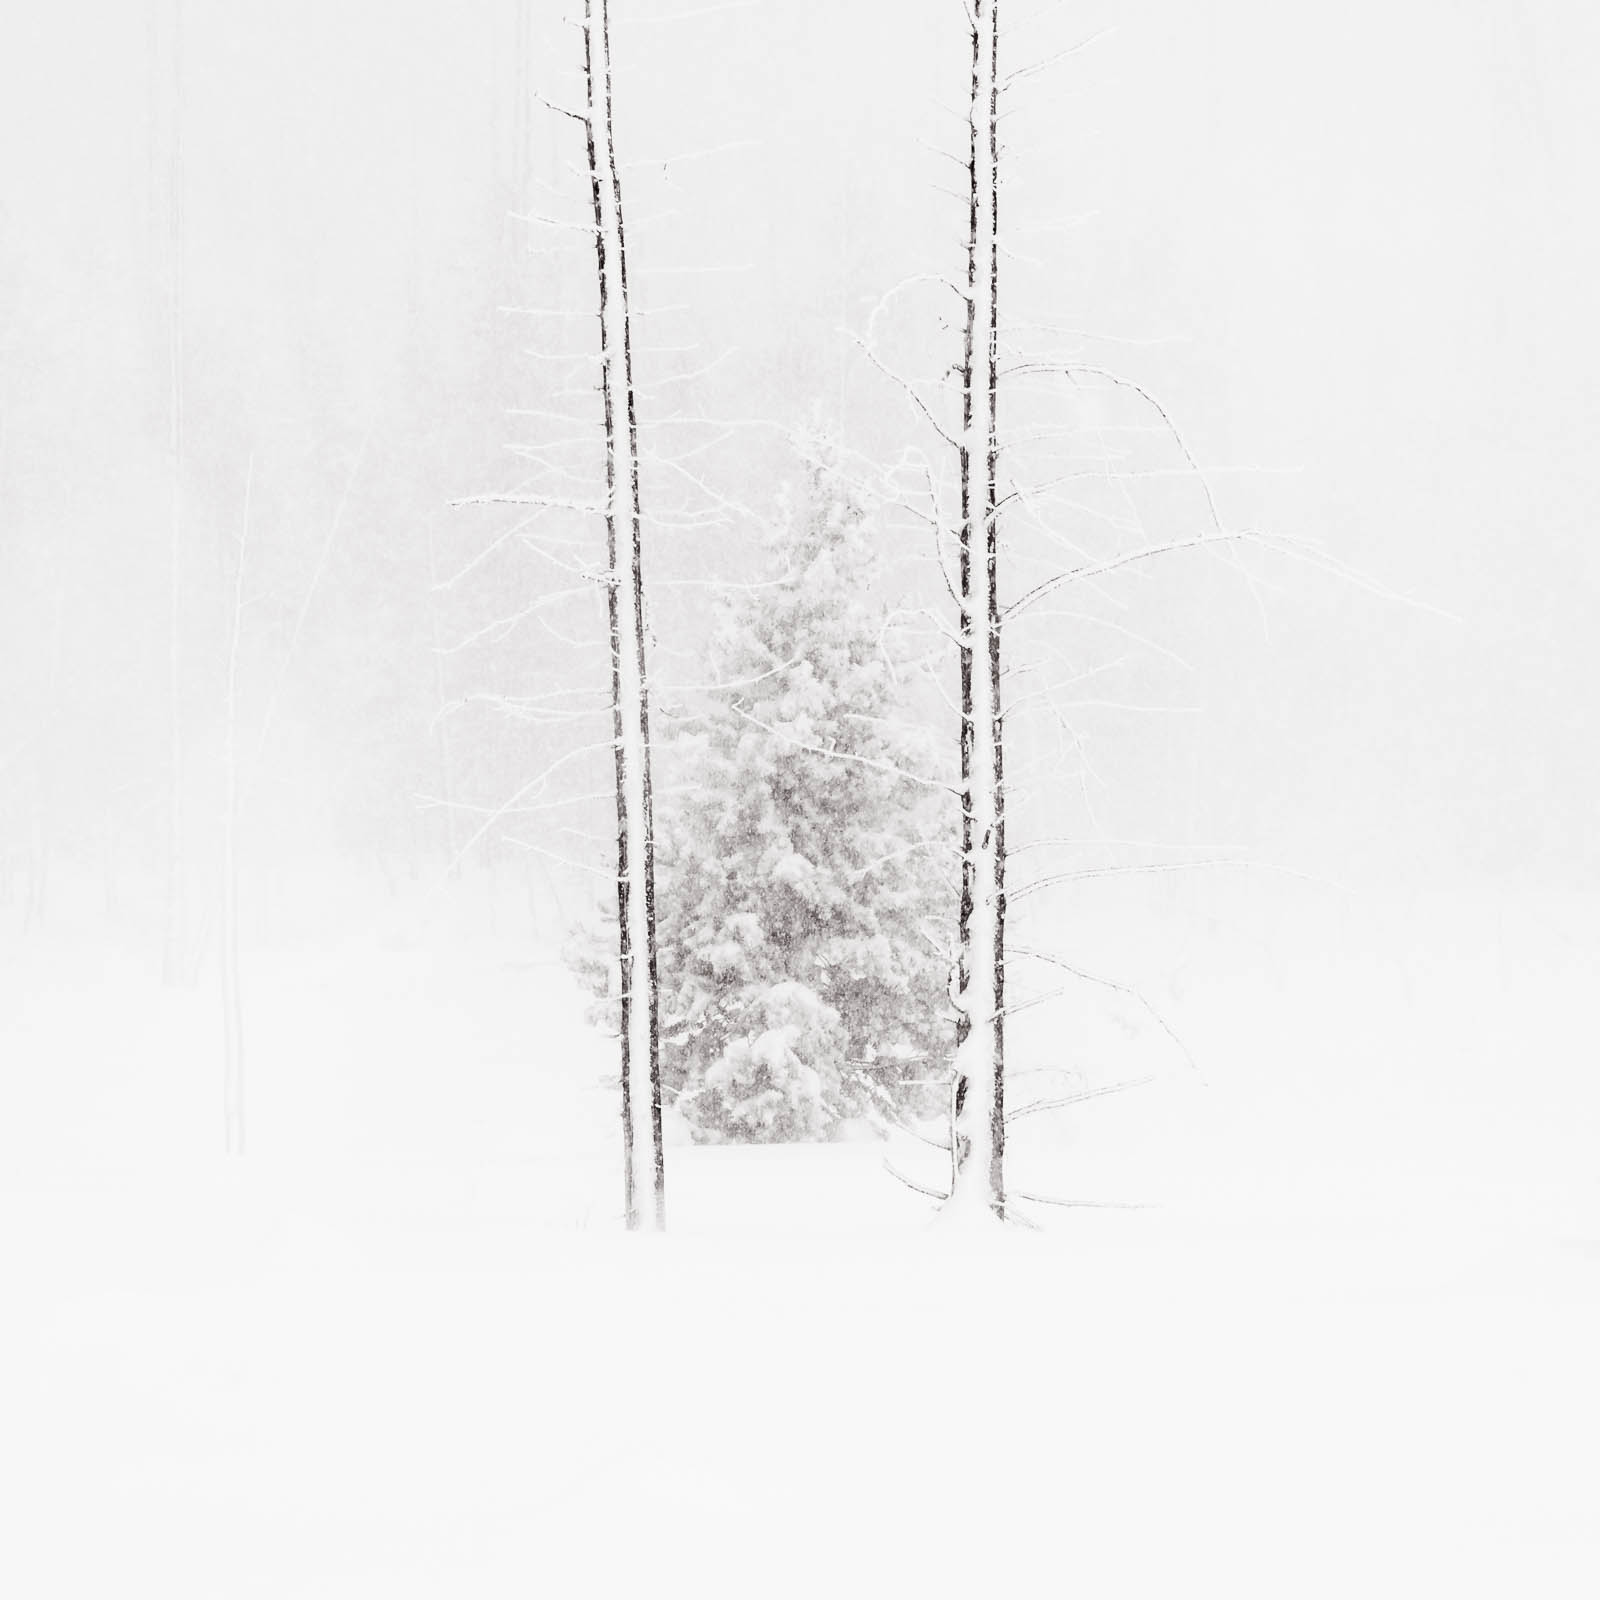 Trees in snow and fog in the winter at Yellowstone National Park